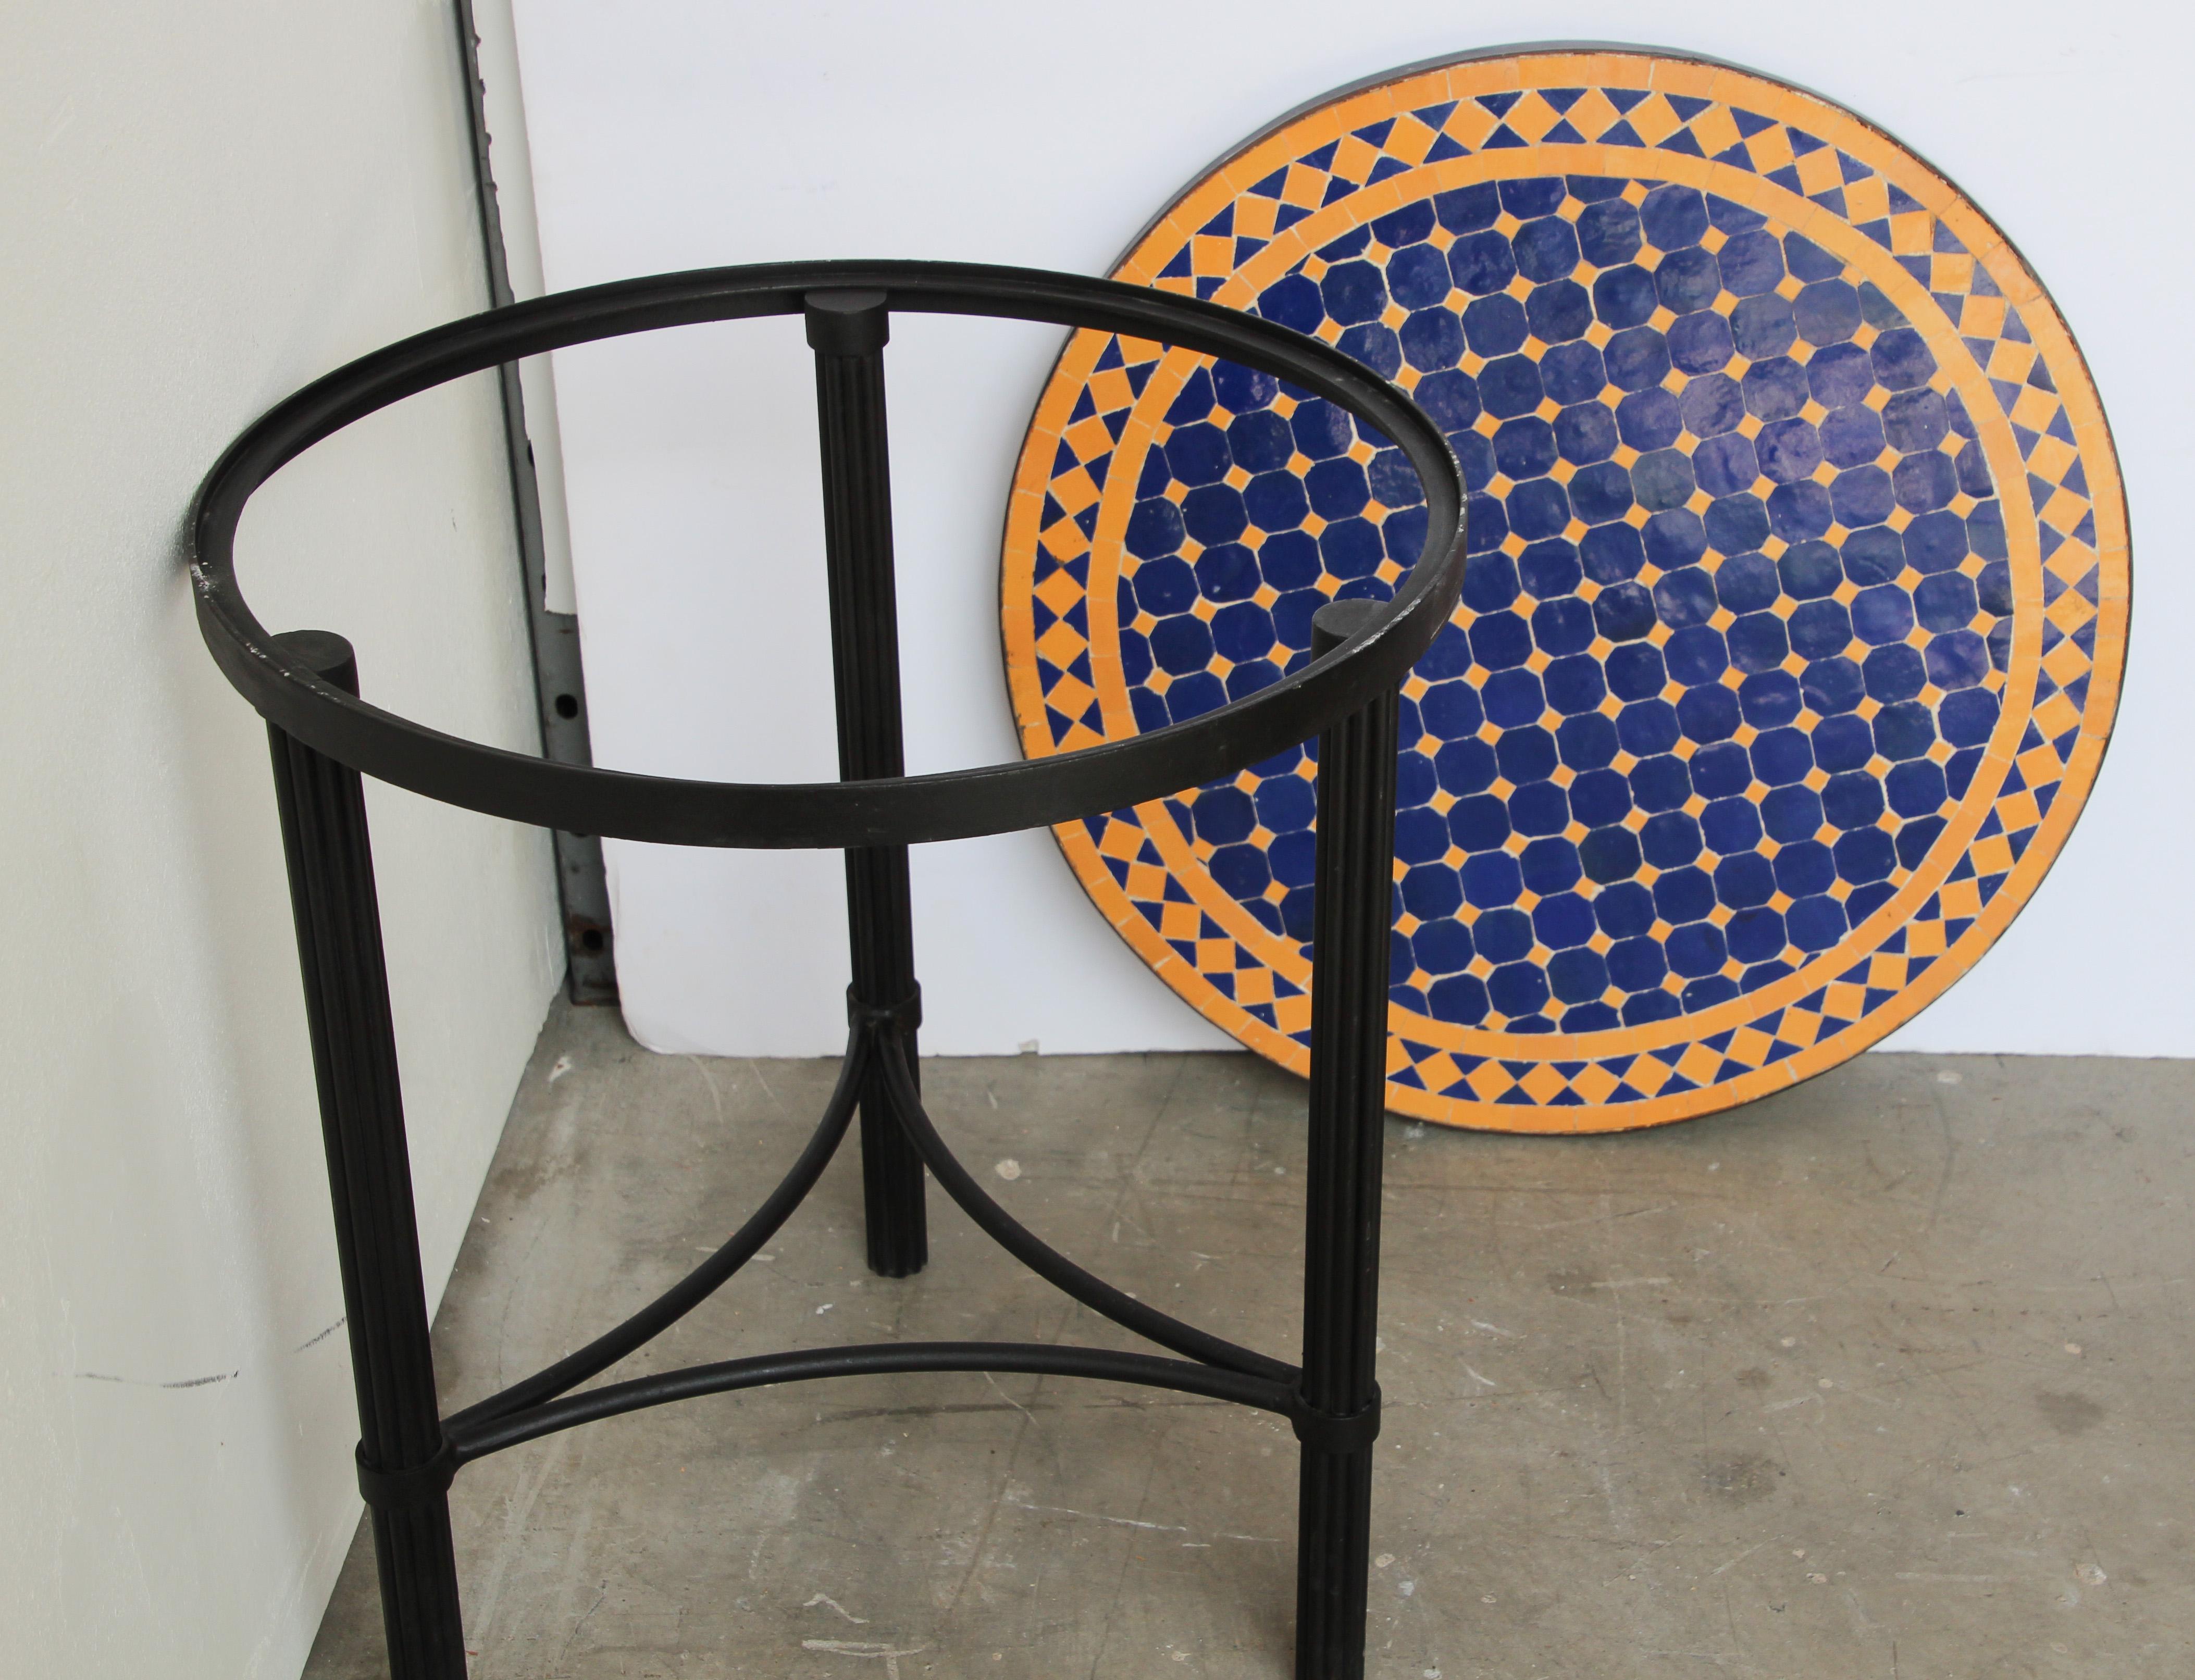 Moroccan Mosaic Tiles Cobalt Blue and Yellow Colors Side Table 5